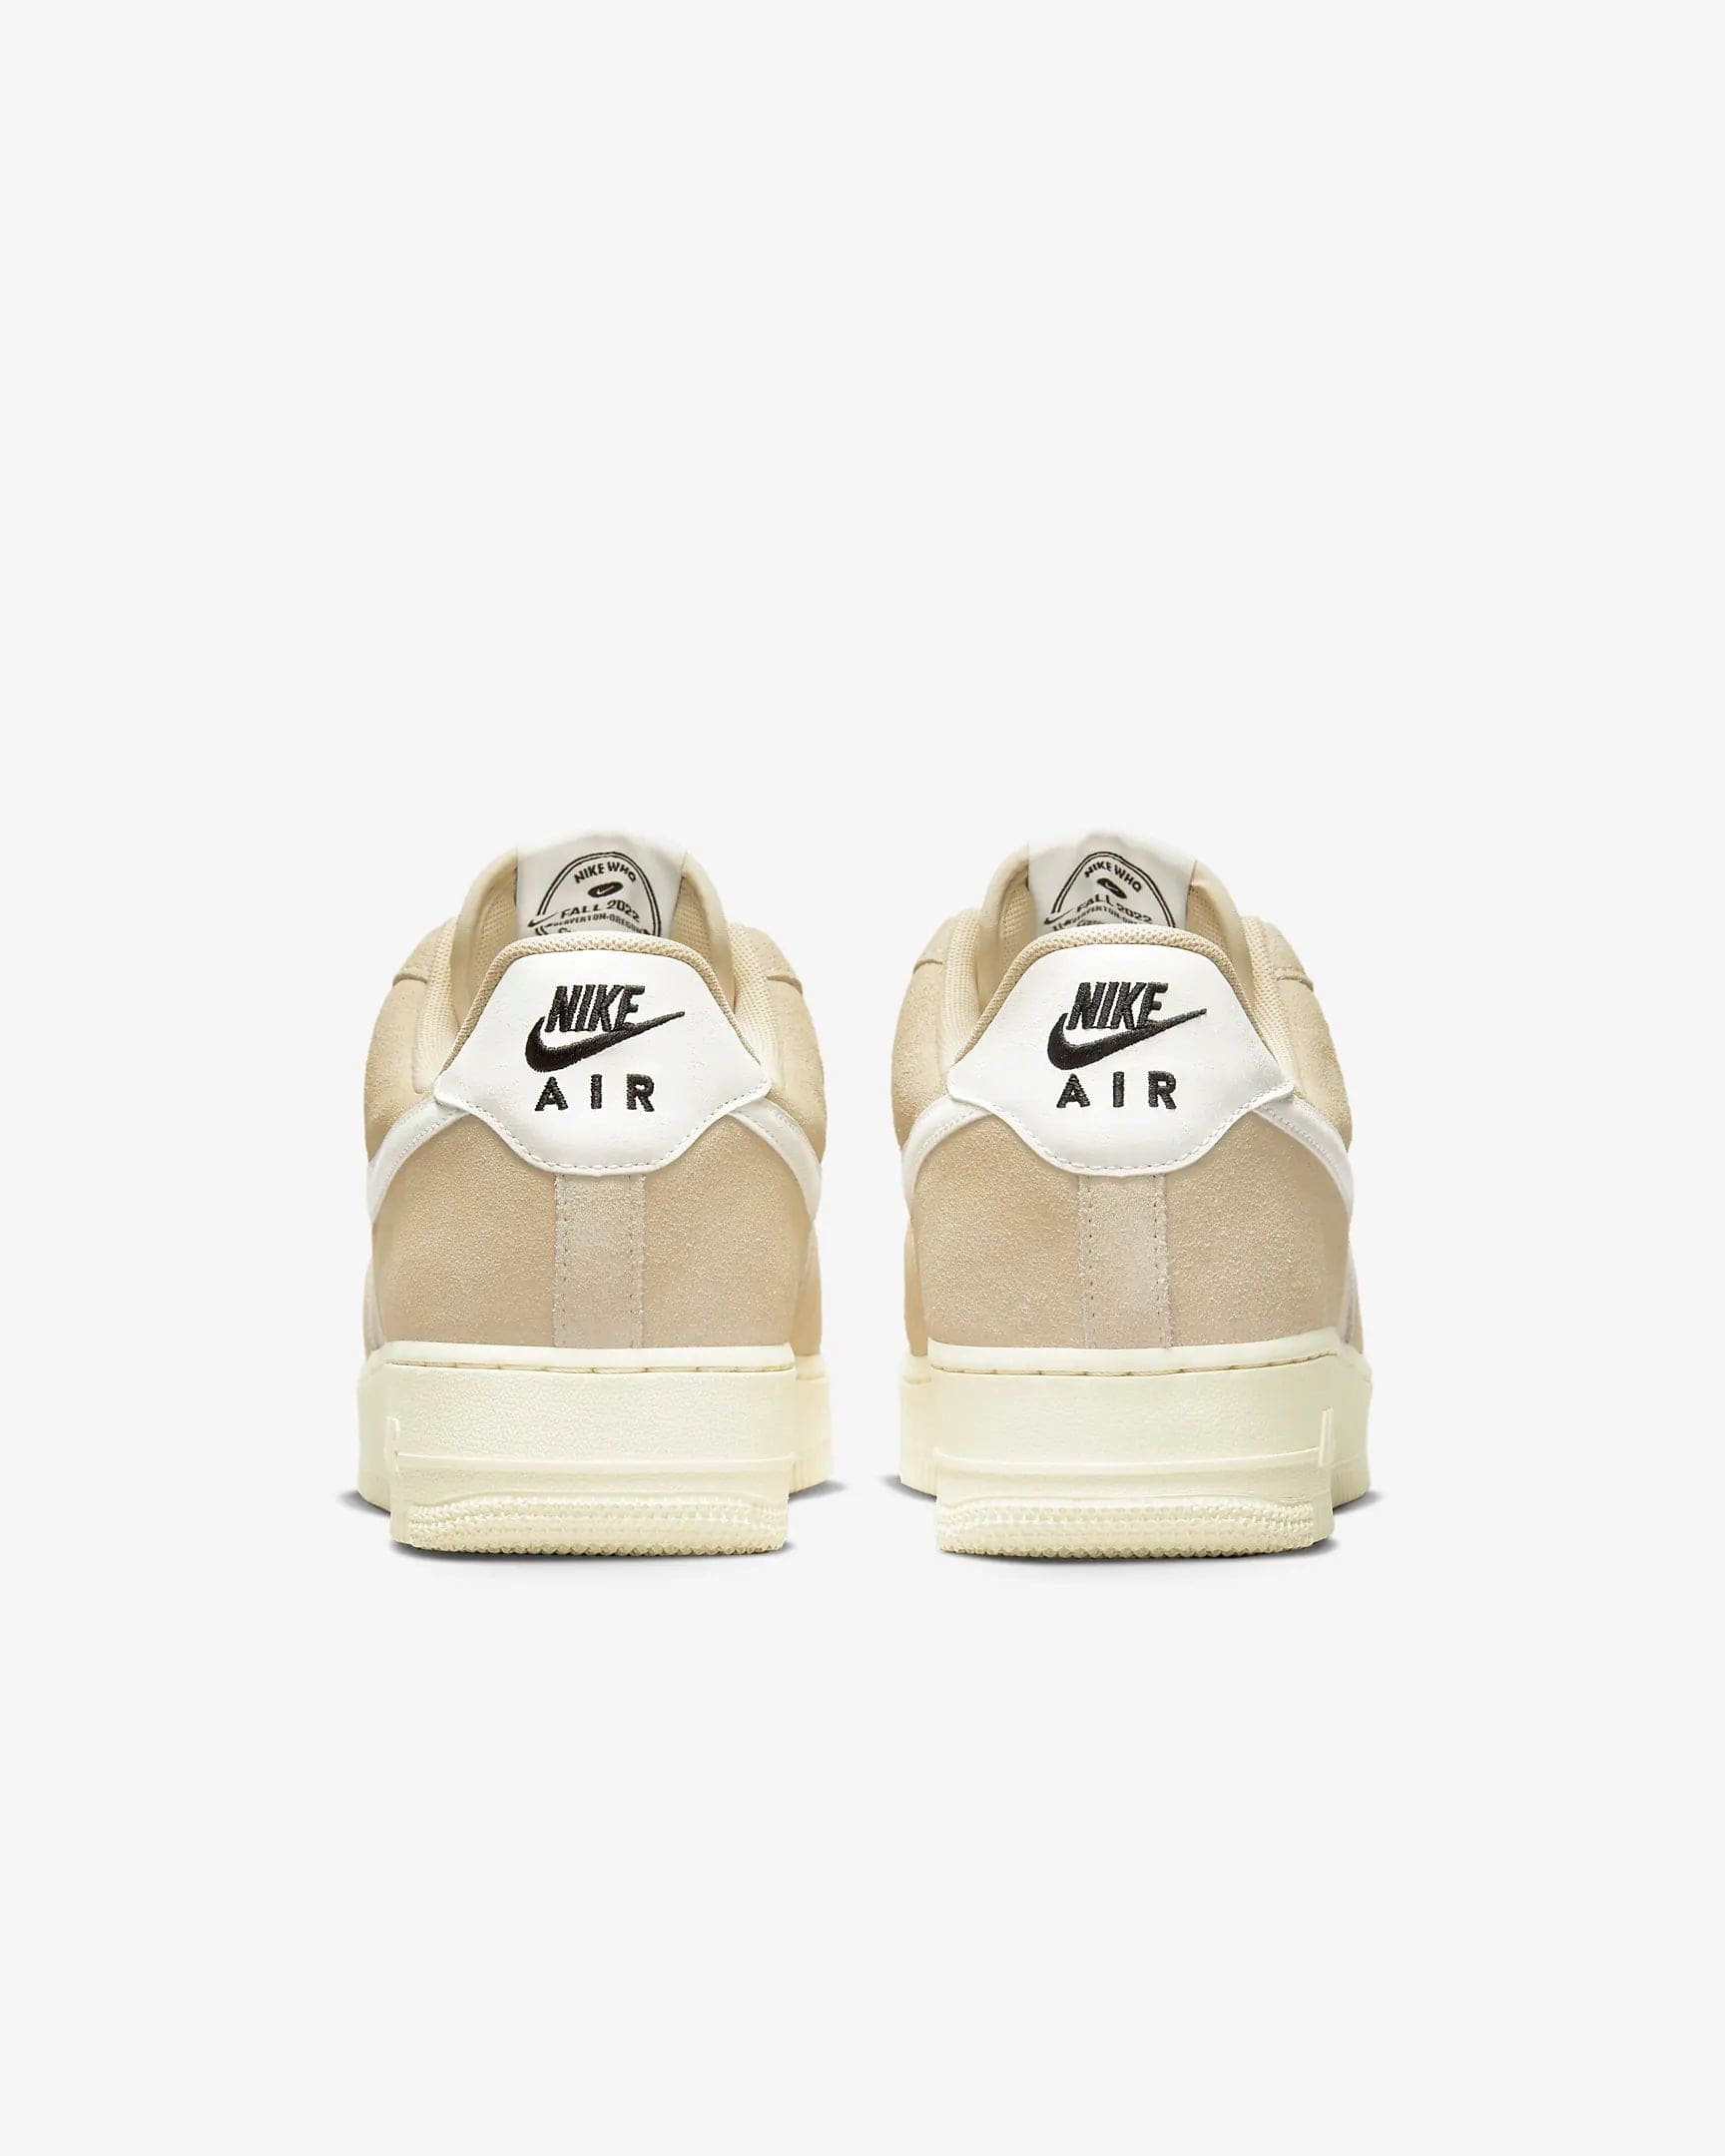 Air Force 1 '07 LV8 product image